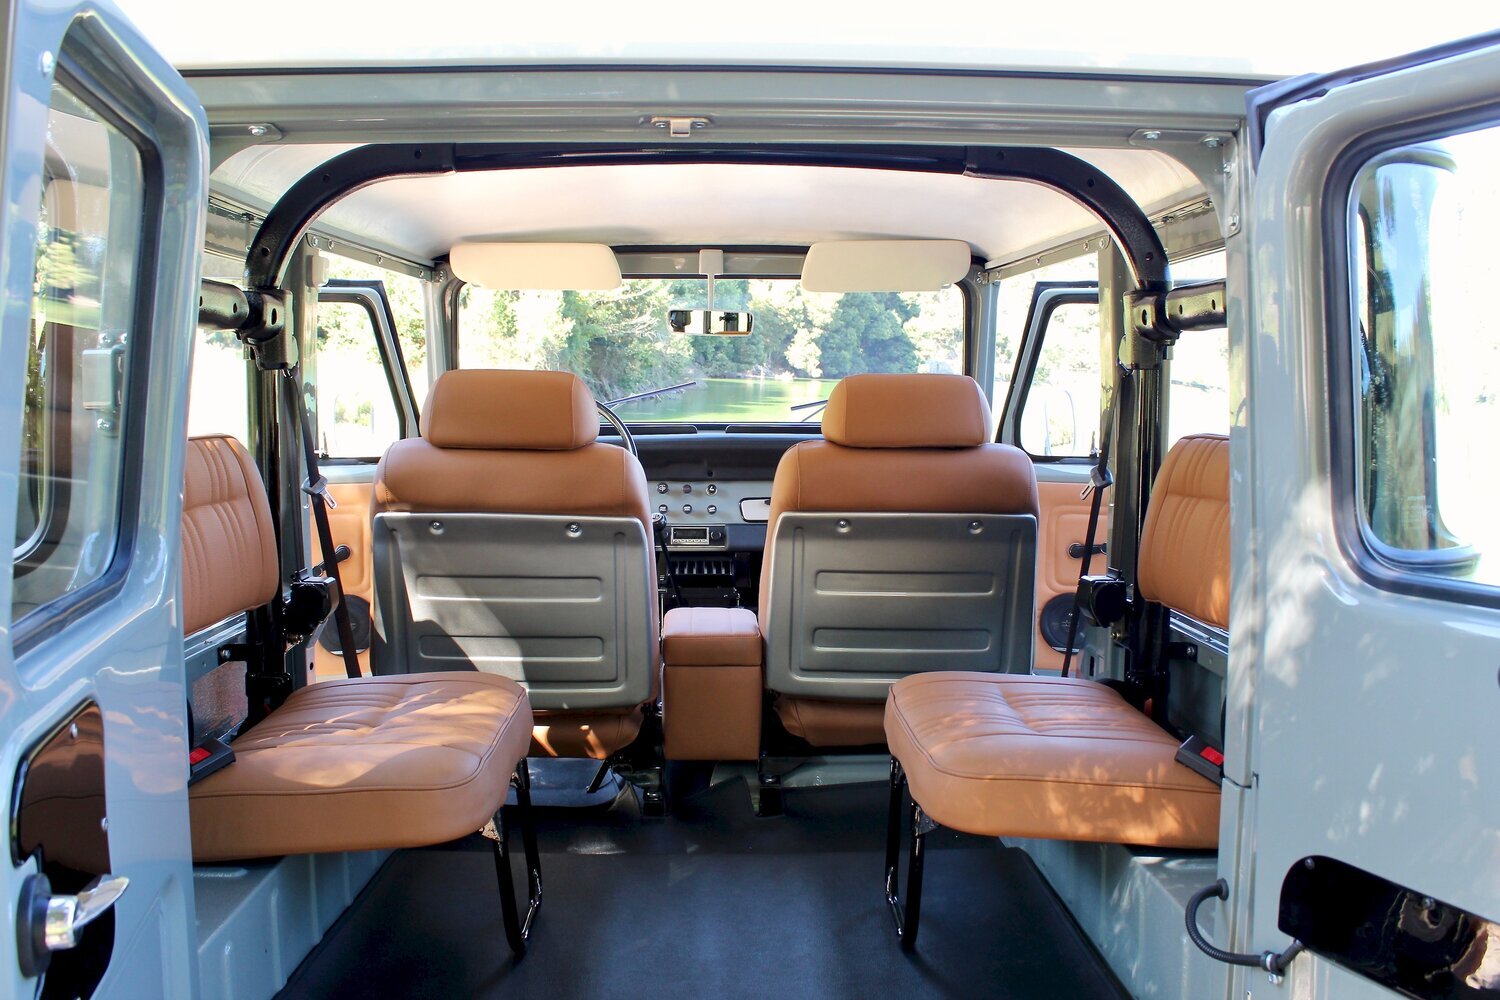 Step inside and sink into the restored rear bench seats of our 1977 Toyota Land Cruiser FJ40. Comfort meets classic style.

#toyota #landcruier #fj40 #tlc #bespoke #truck #custom #restoration #handcrafted #classiccar #luxurylifestyle #classic #vintag